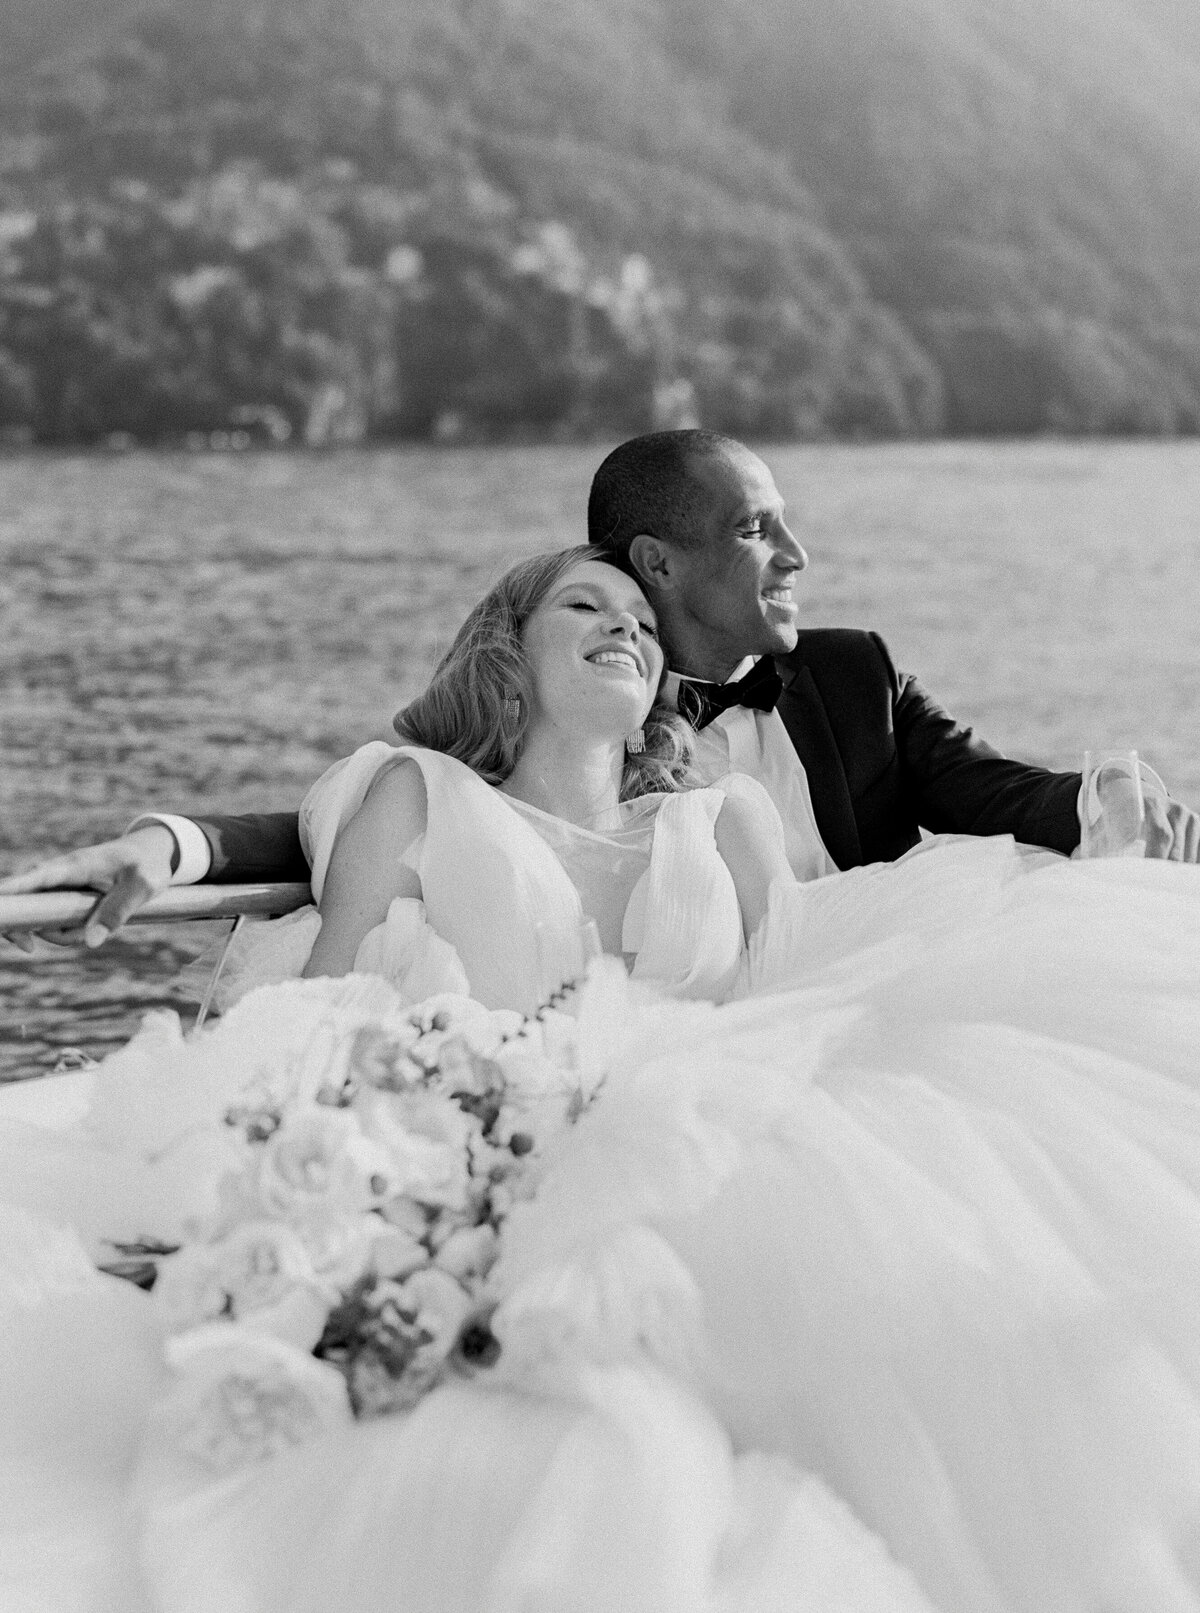 Liz Andolina Photography Destination Wedding Photographer in Italy, New York, Across the East Coast Editorial, heritage-quality images for stylish couples Villa Pizzo Editorial-Liz Andolina Photography-353